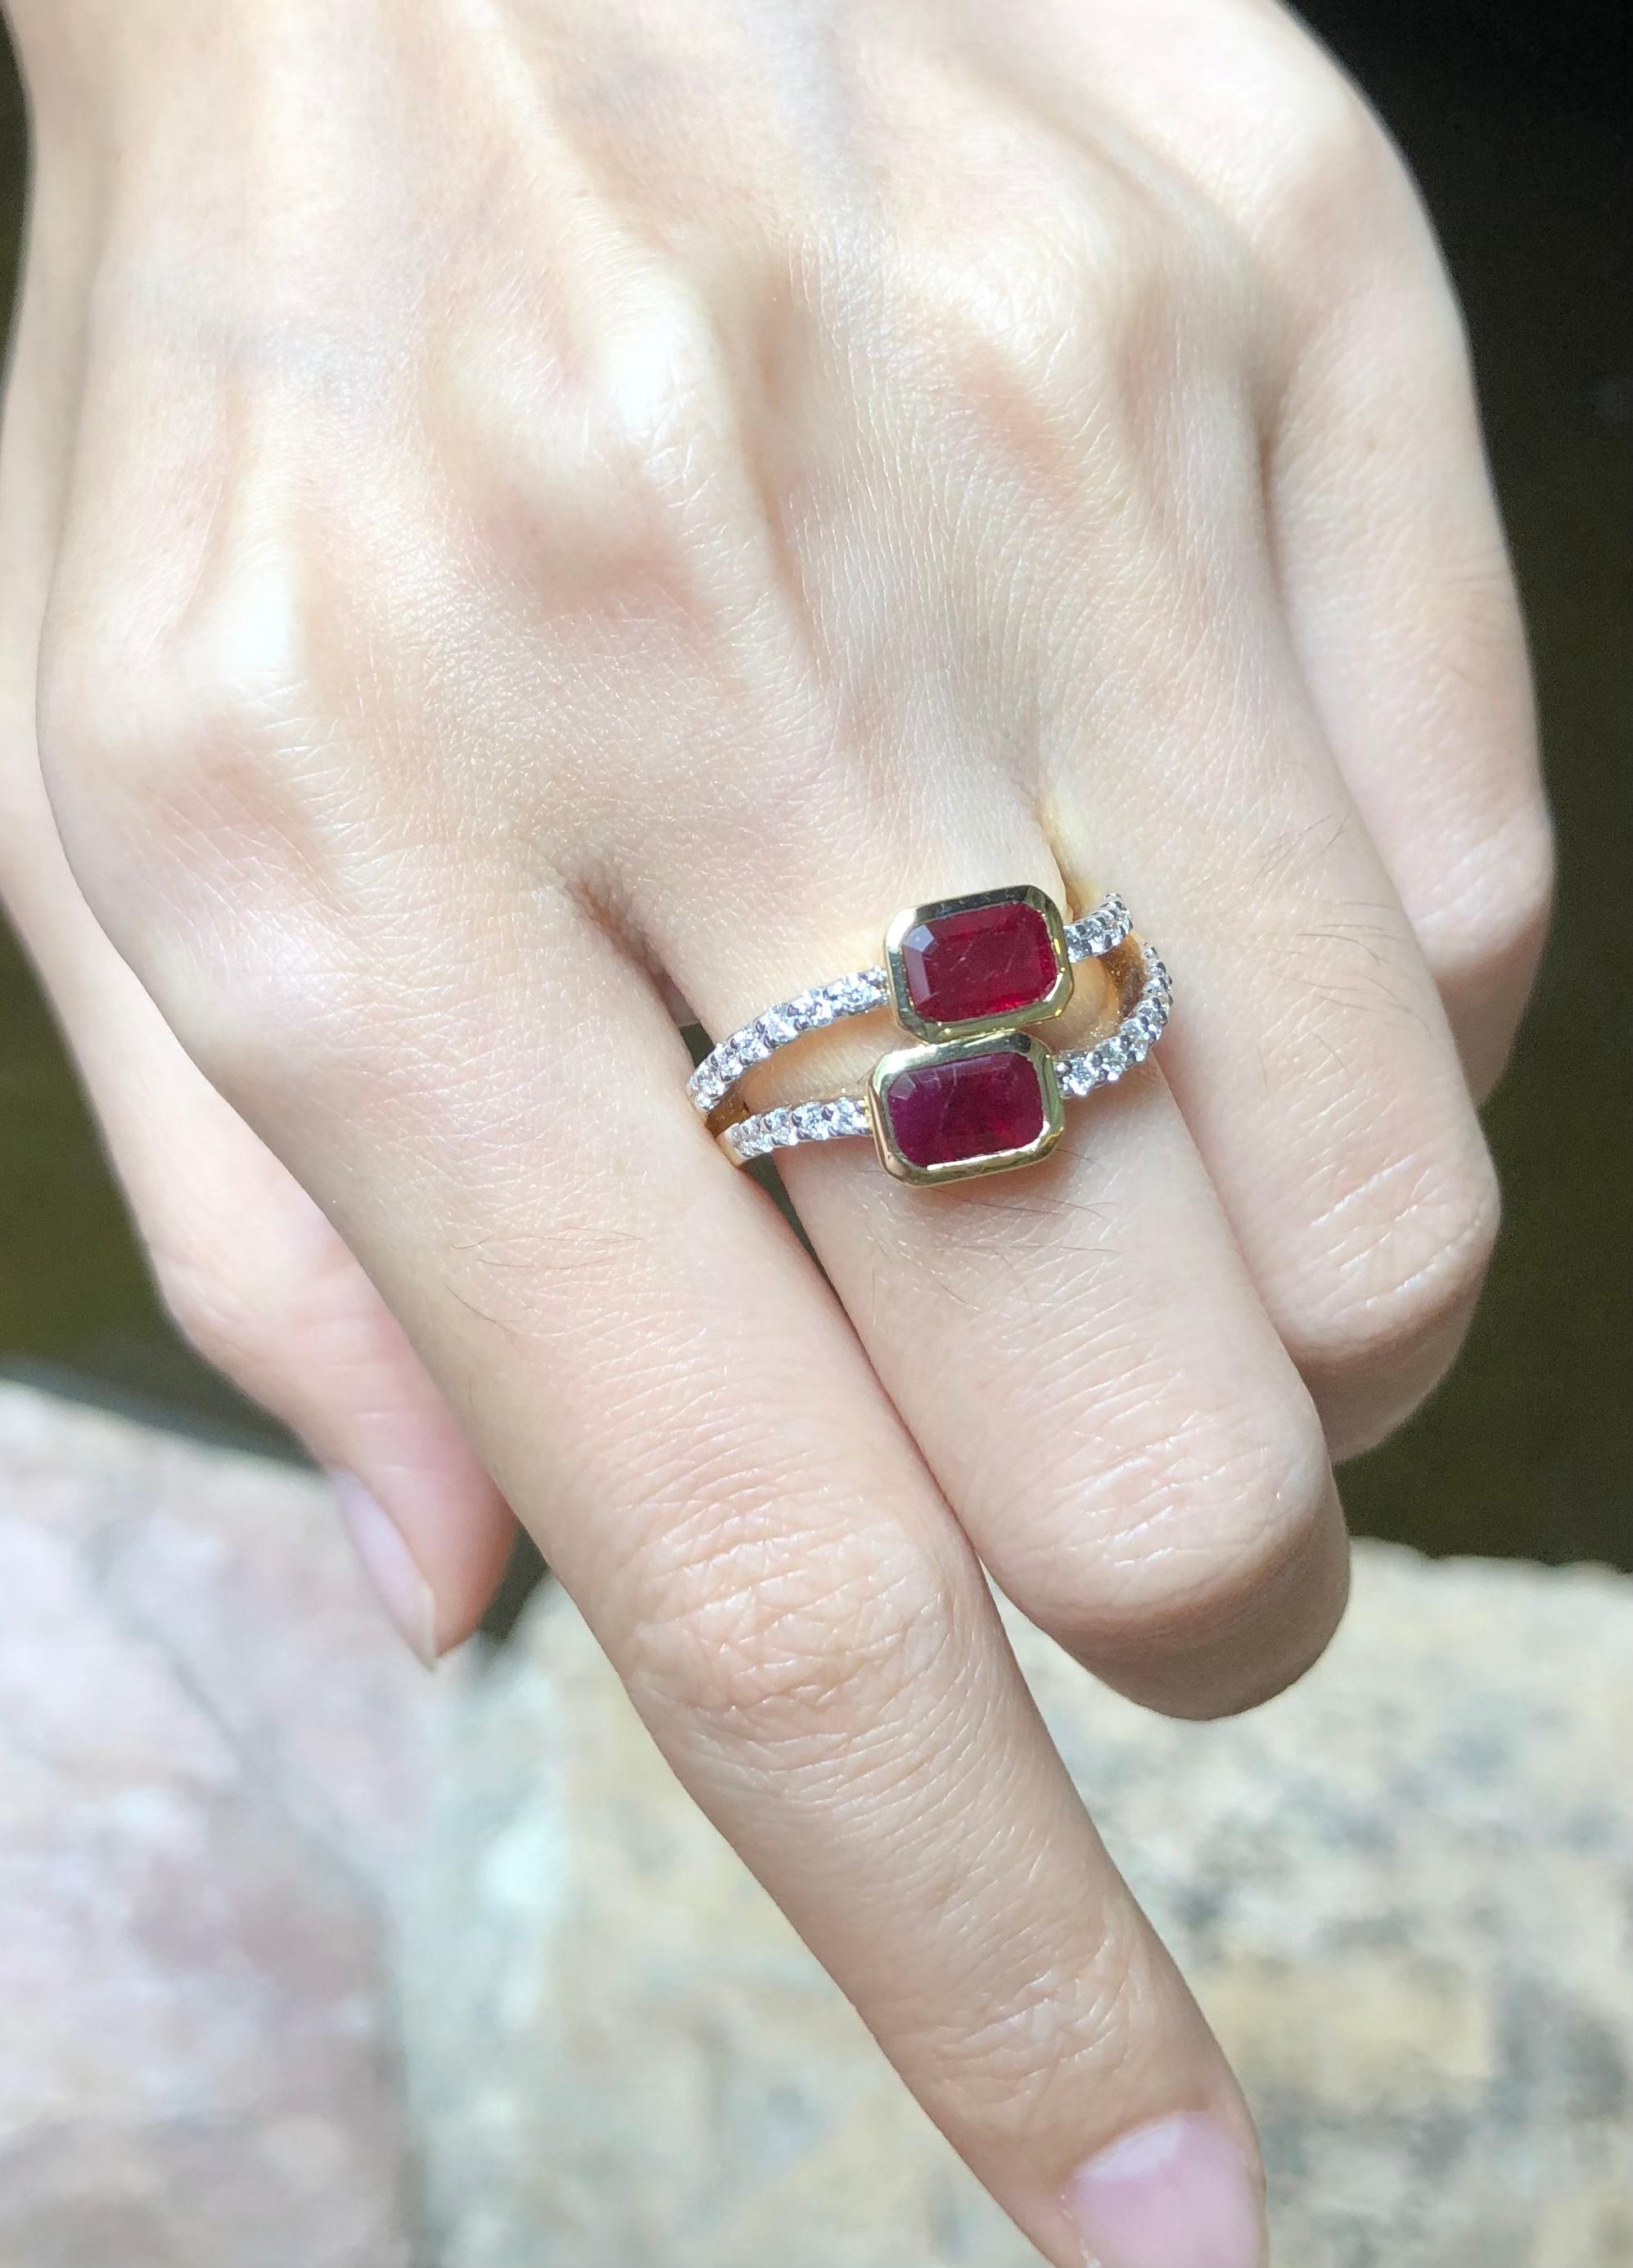 Ruby 1.47 carats with Diamond 0.33 carat Ring set in 18 Karat Gold Settings

Width:  1.0 cm 
Length: 1.0 cm
Ring Size: 53
Total Weight: 7.13 grams

